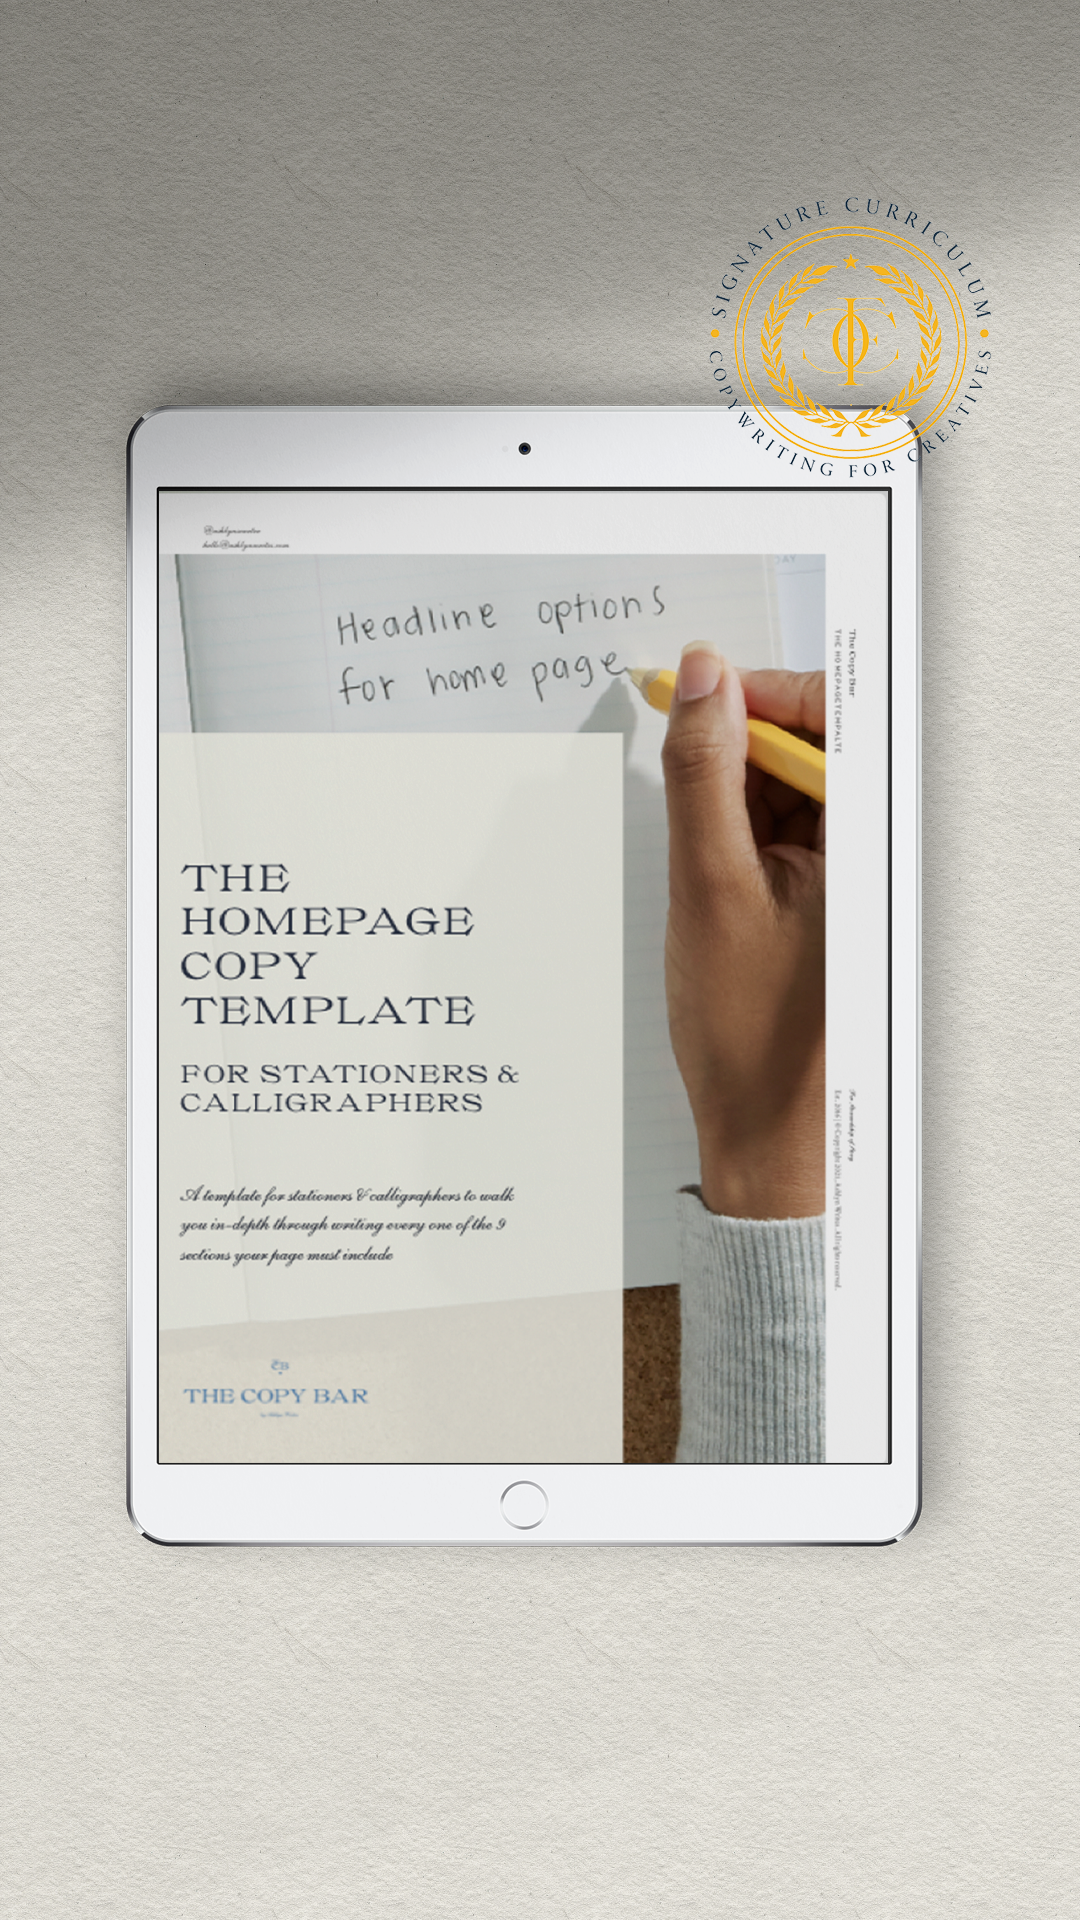 Homepage Copy Template for Stationers & Calligraphers